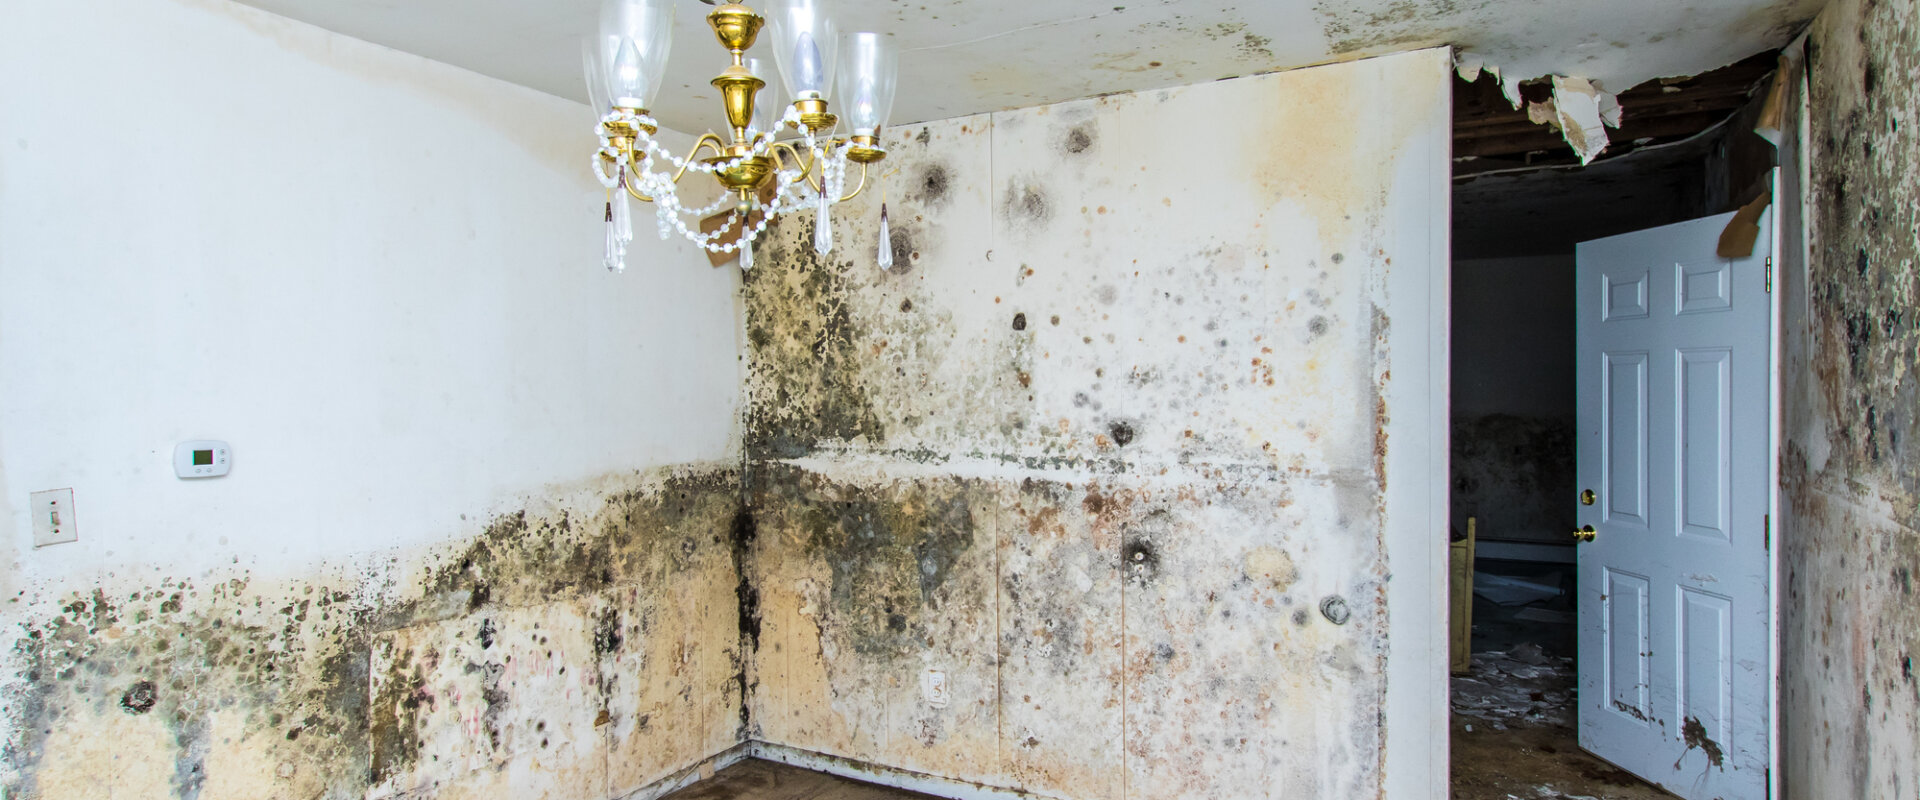 Selling House With Mold